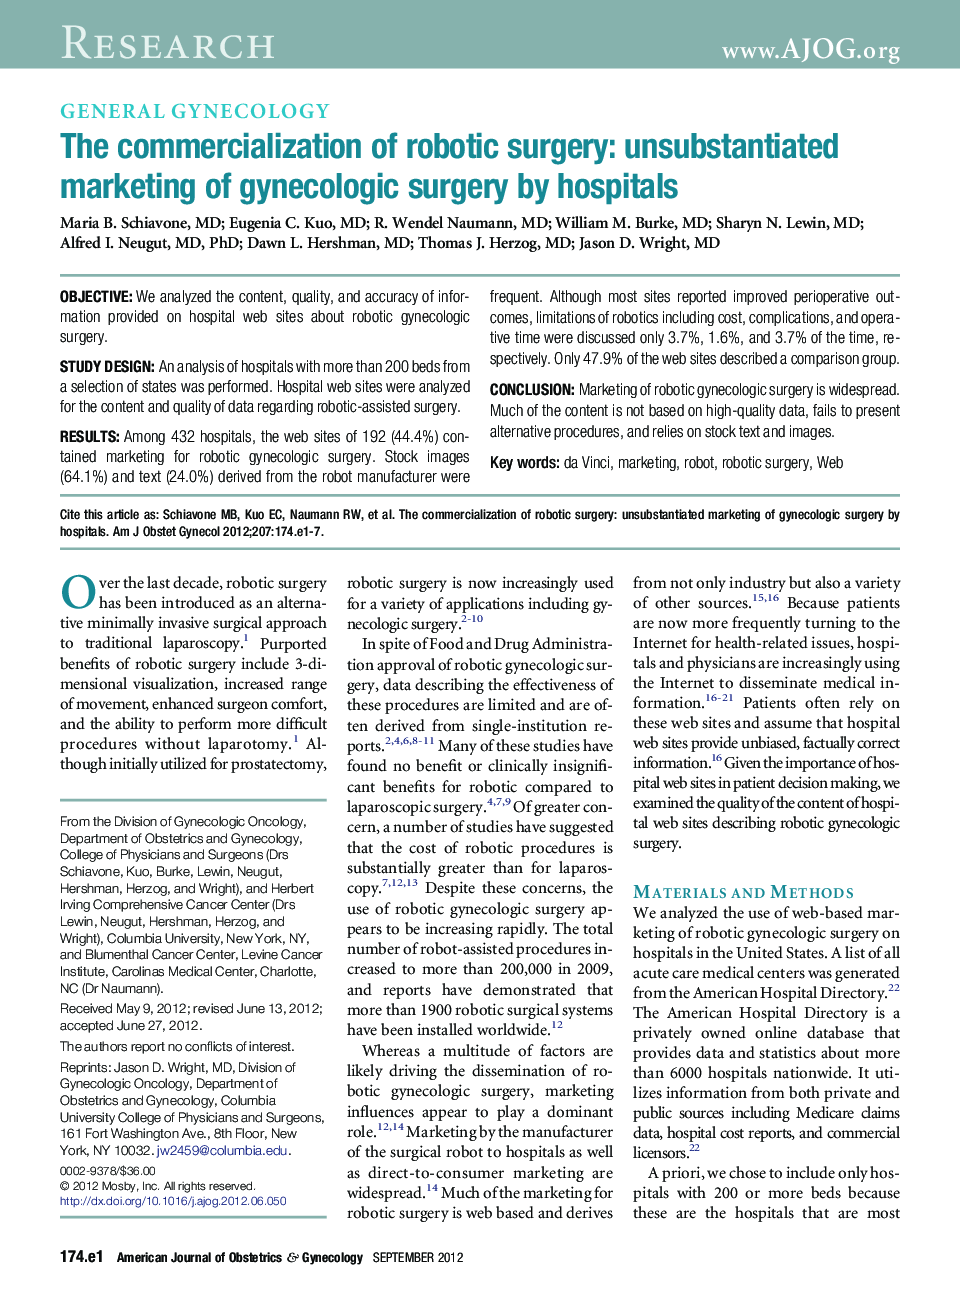 The commercialization of robotic surgery: unsubstantiated marketing of gynecologic surgery by hospitals